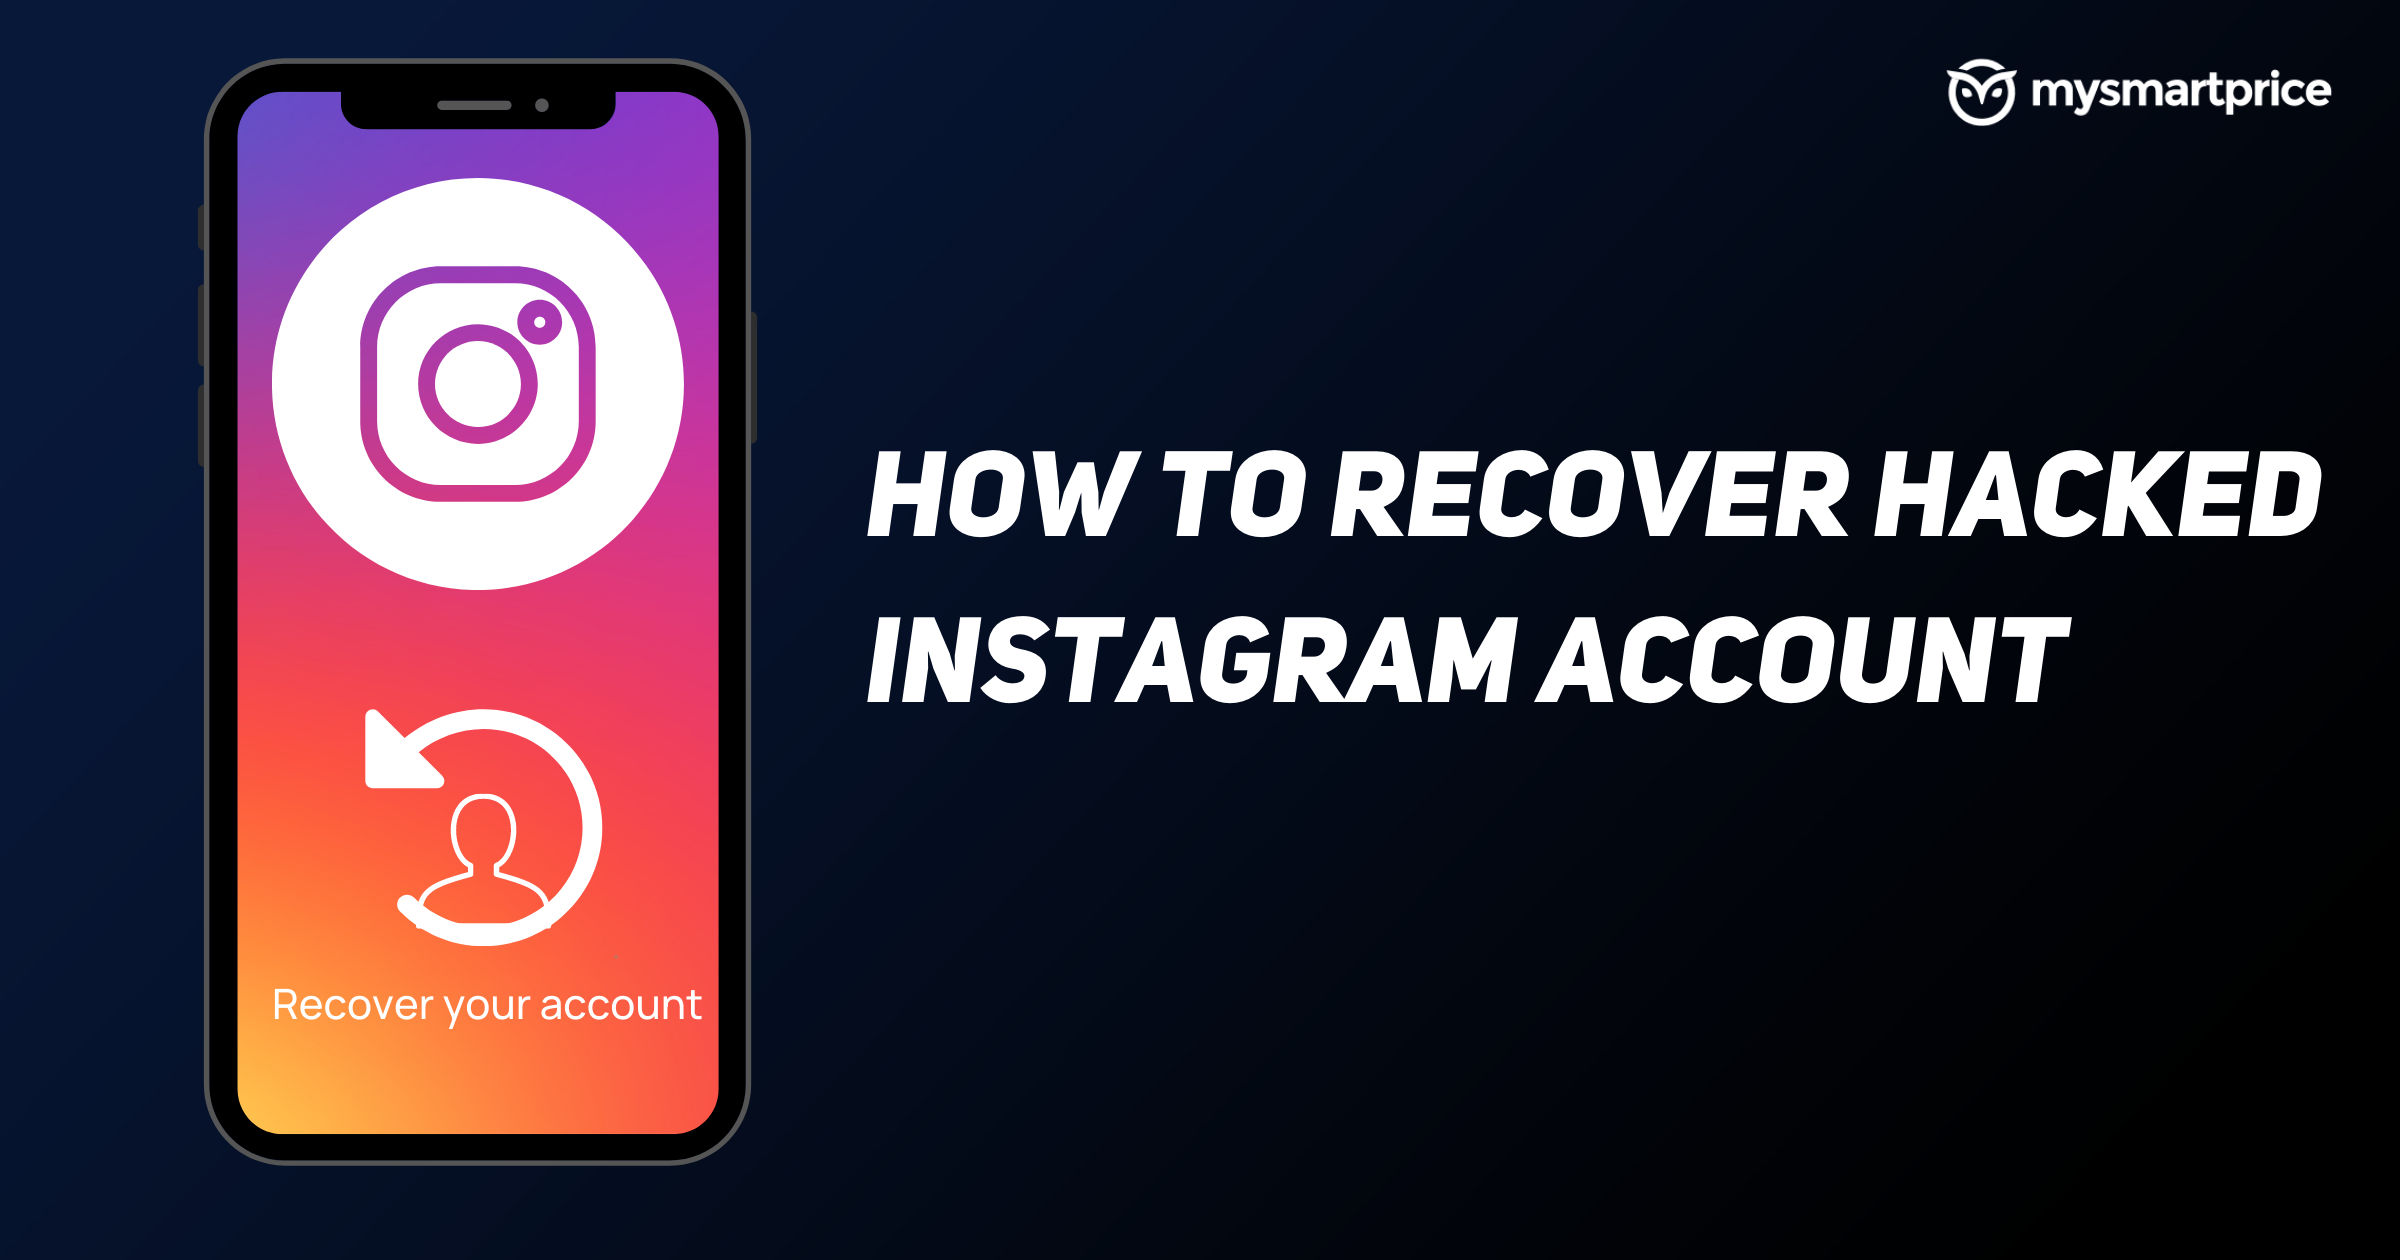 Instagram Account Hacked and Email ID, Password Changed? Here's How to